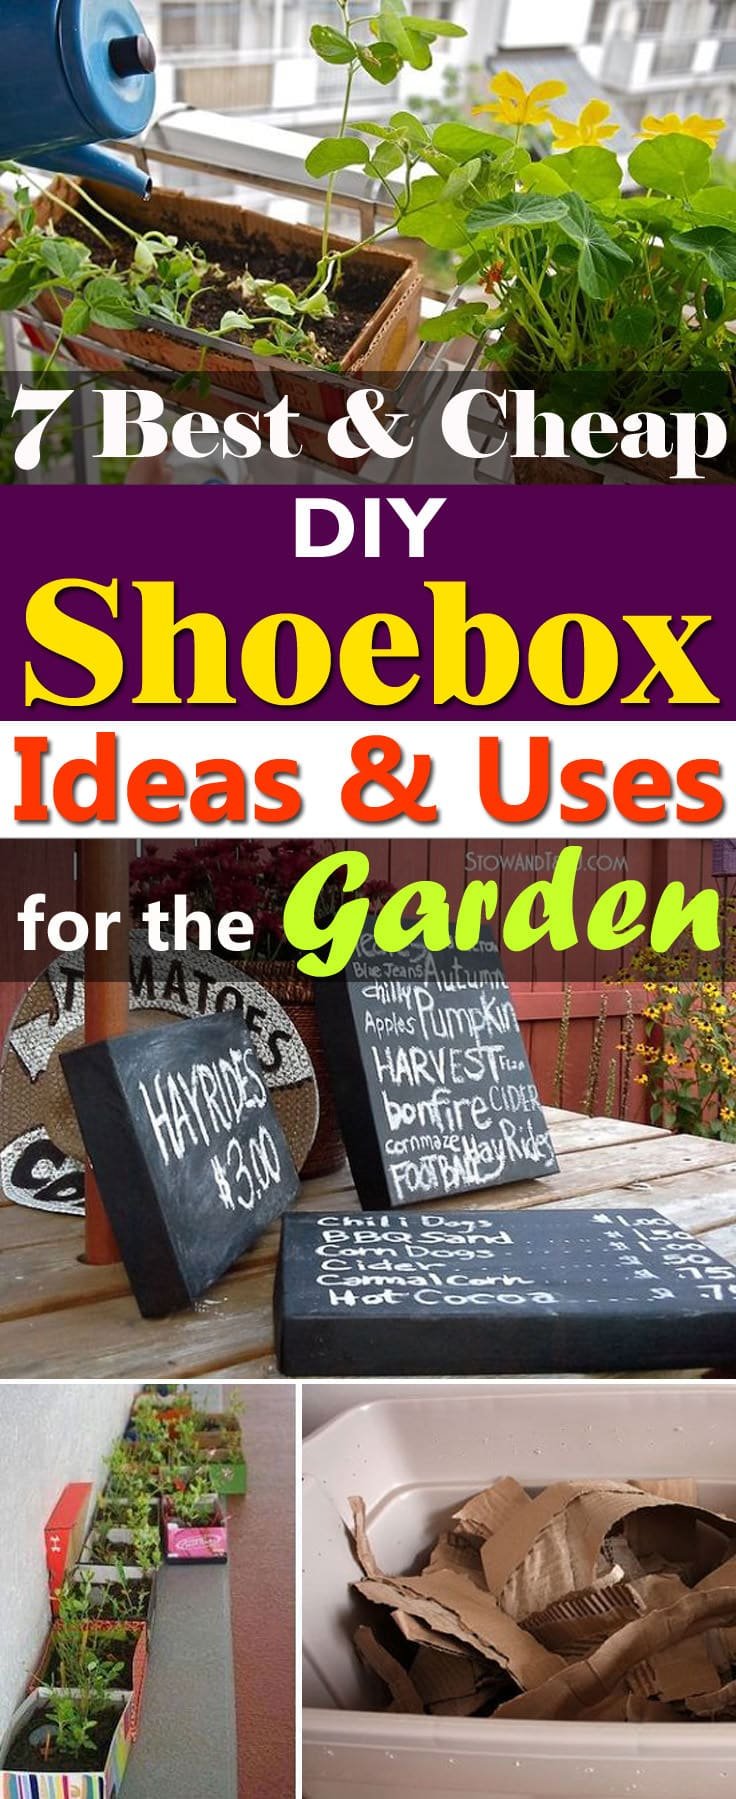 Those shoe boxes you always throw away can be useful. Here're the 7 Best DIY Shoe Box Ideas and Uses for the garden you need to look at!